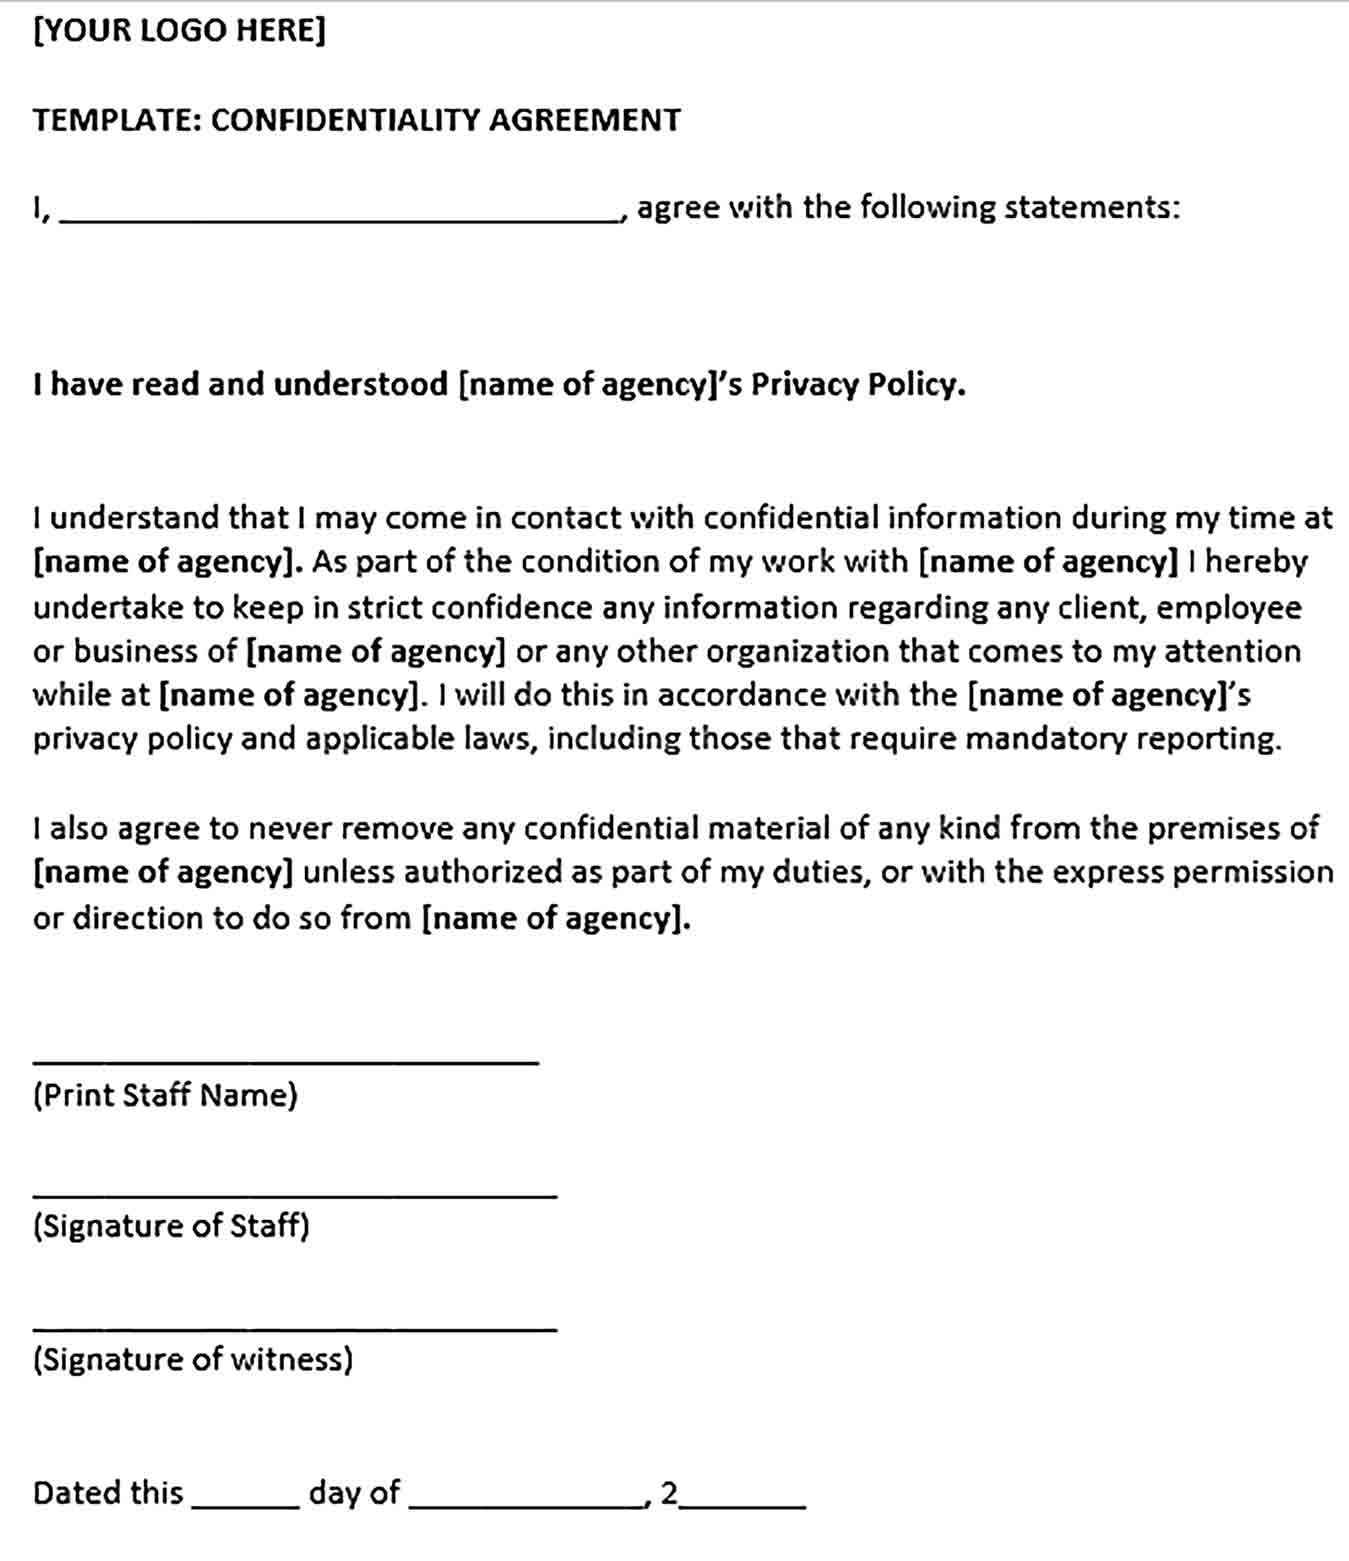 Sample Celebrity Confidentiality Agreement